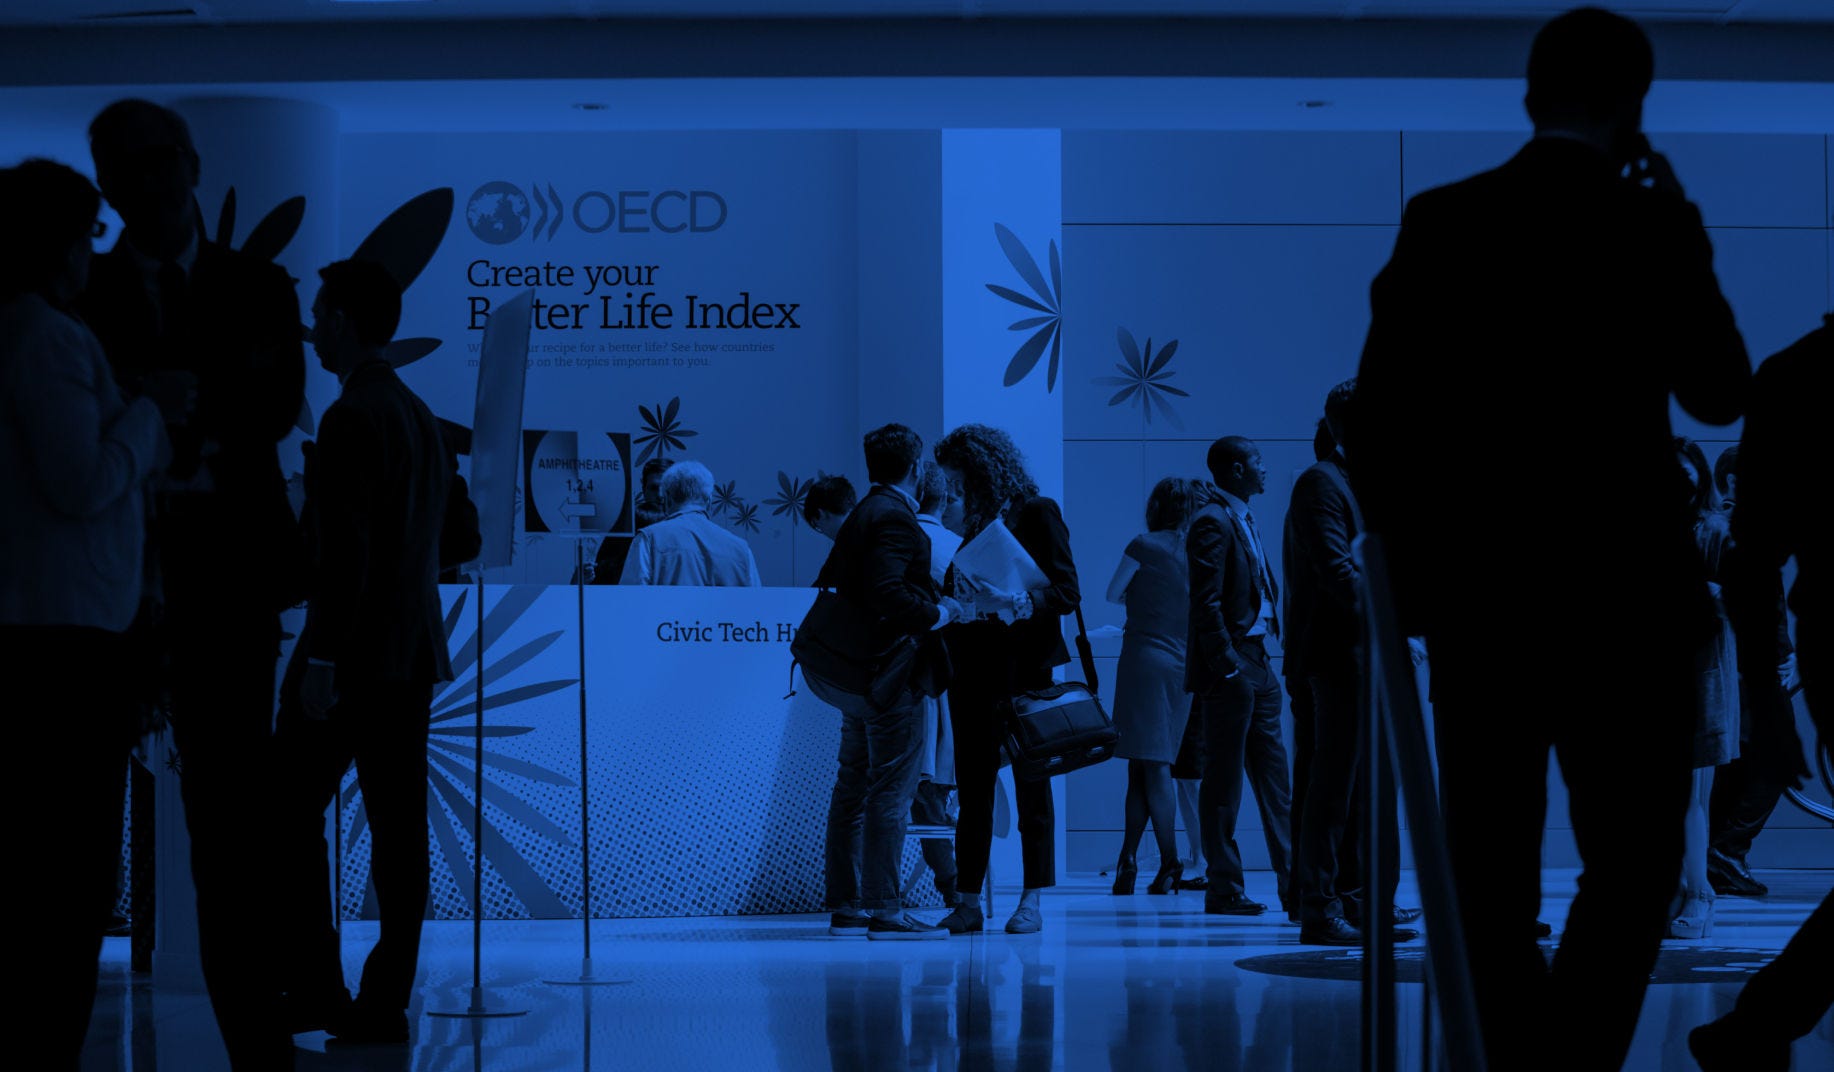 Conference in the OECD